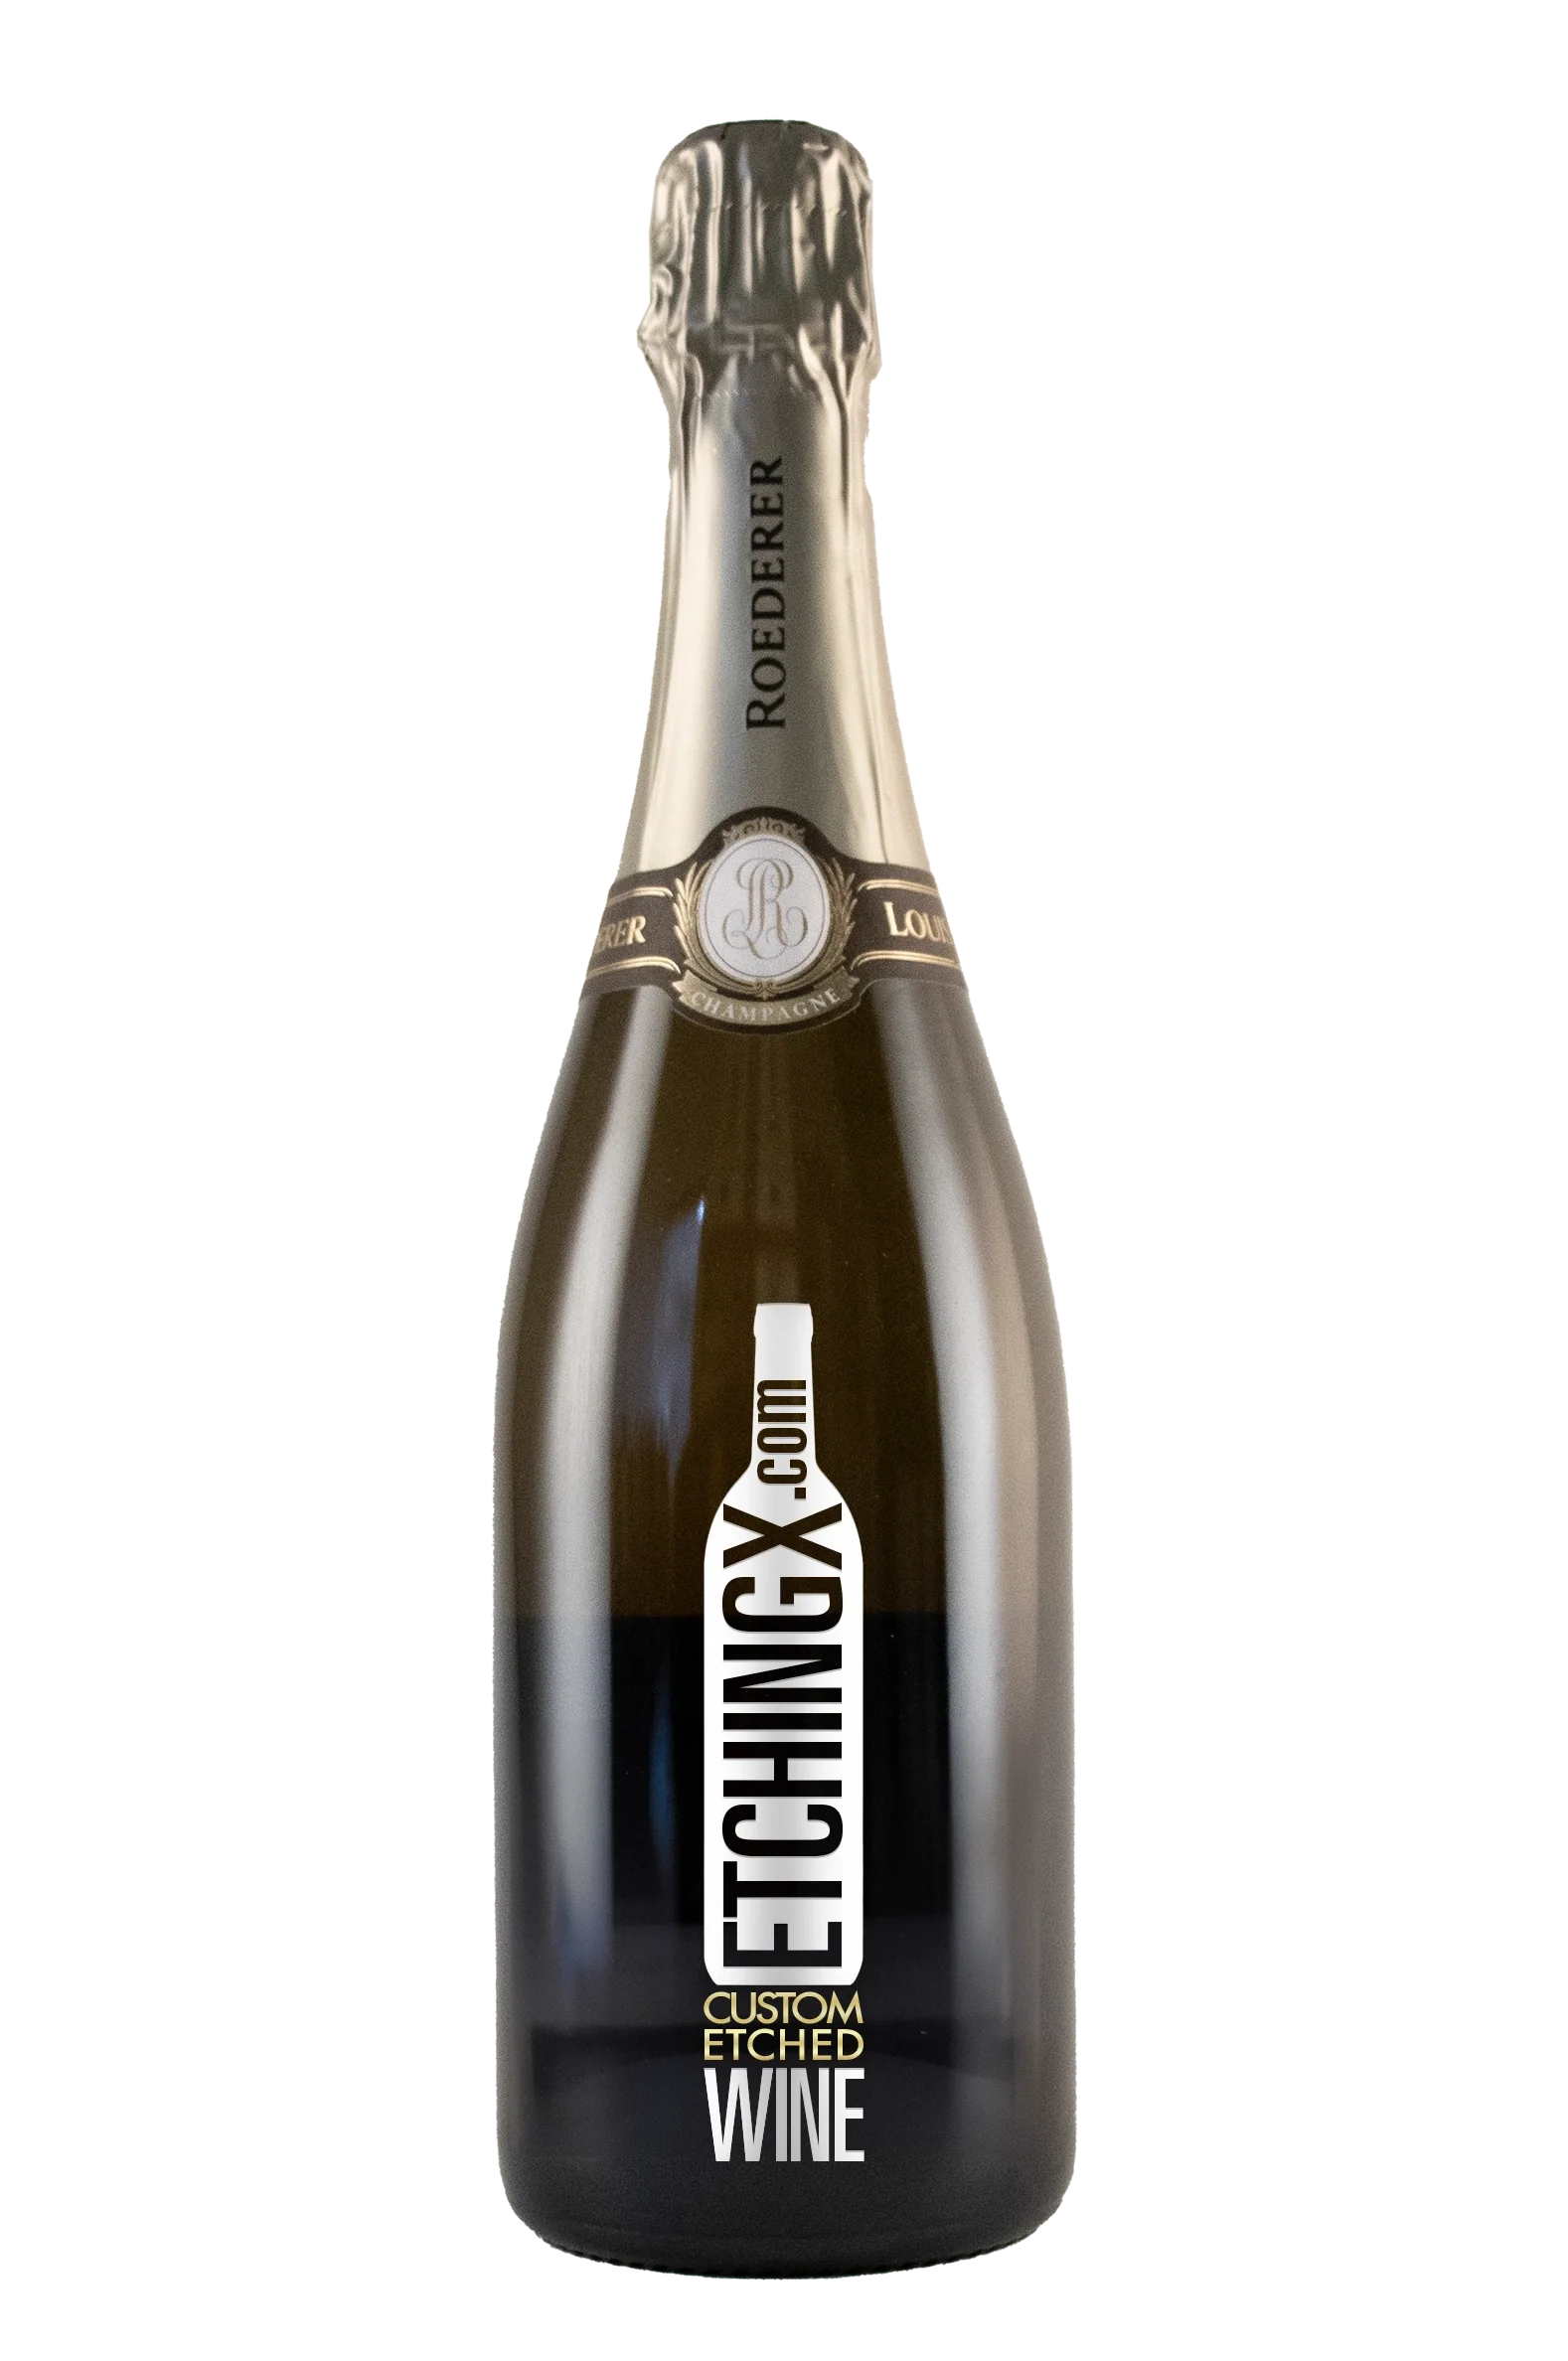 Louis Roederer Champagne Brut Collection 244